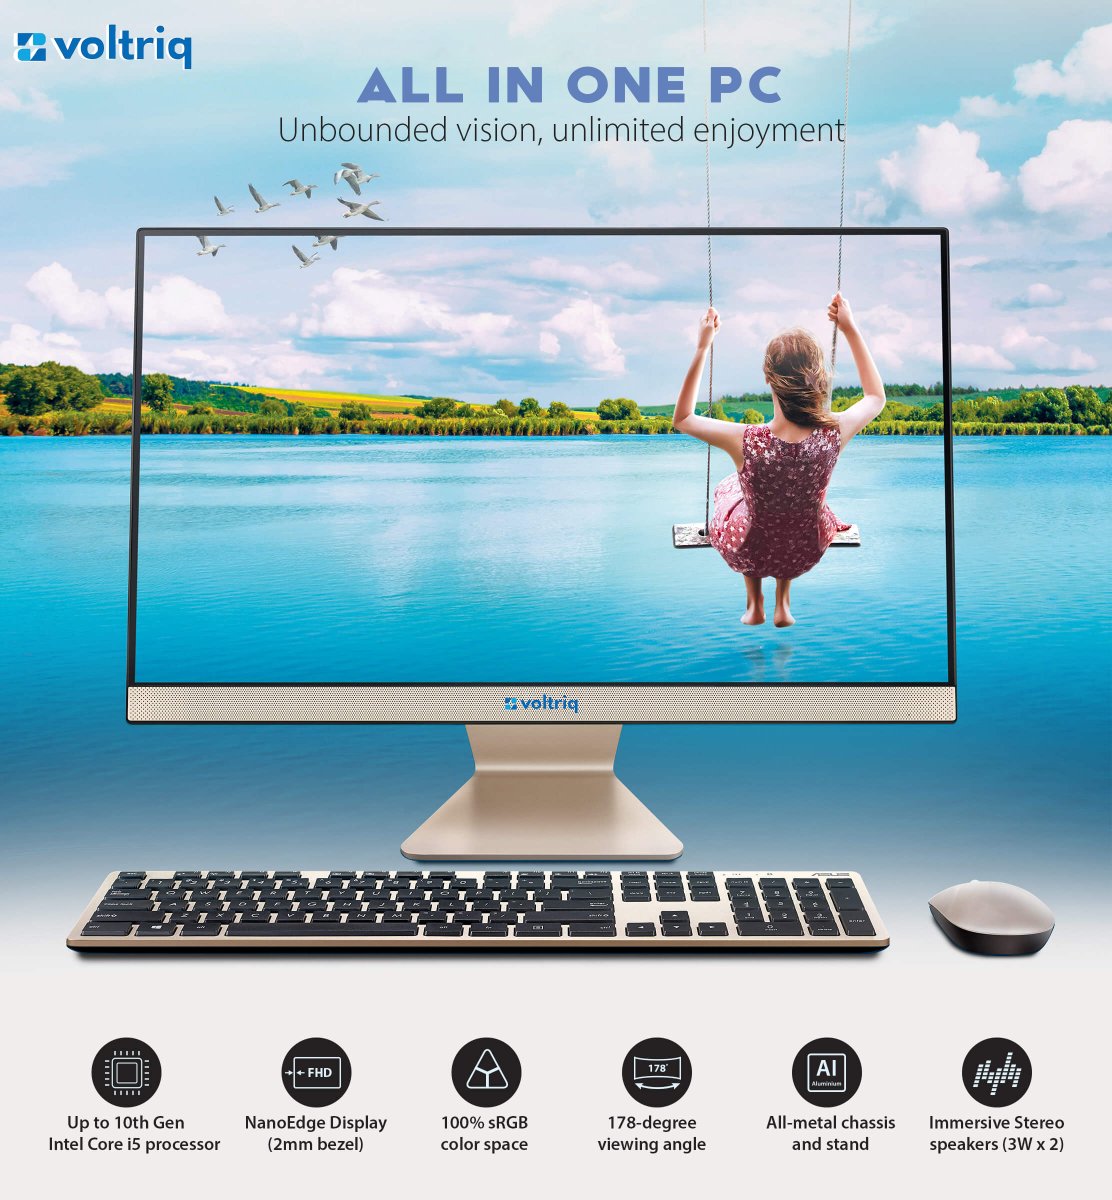 India's No.1 Electronic Brand
@voltriq

GIVE OUR VOLTRIQ ALL IN ONE PC
TO YOUR LOVE ONES

Unbounded vision,unlimited enjoyment

ITS ALL YOU COULD NEED IN ONE

#voltriq #voltriqindia #bestdeals #bestoffers #bestproduct #GeMIndia #Gemportal #gemdealer #indianproducts #makeinindia